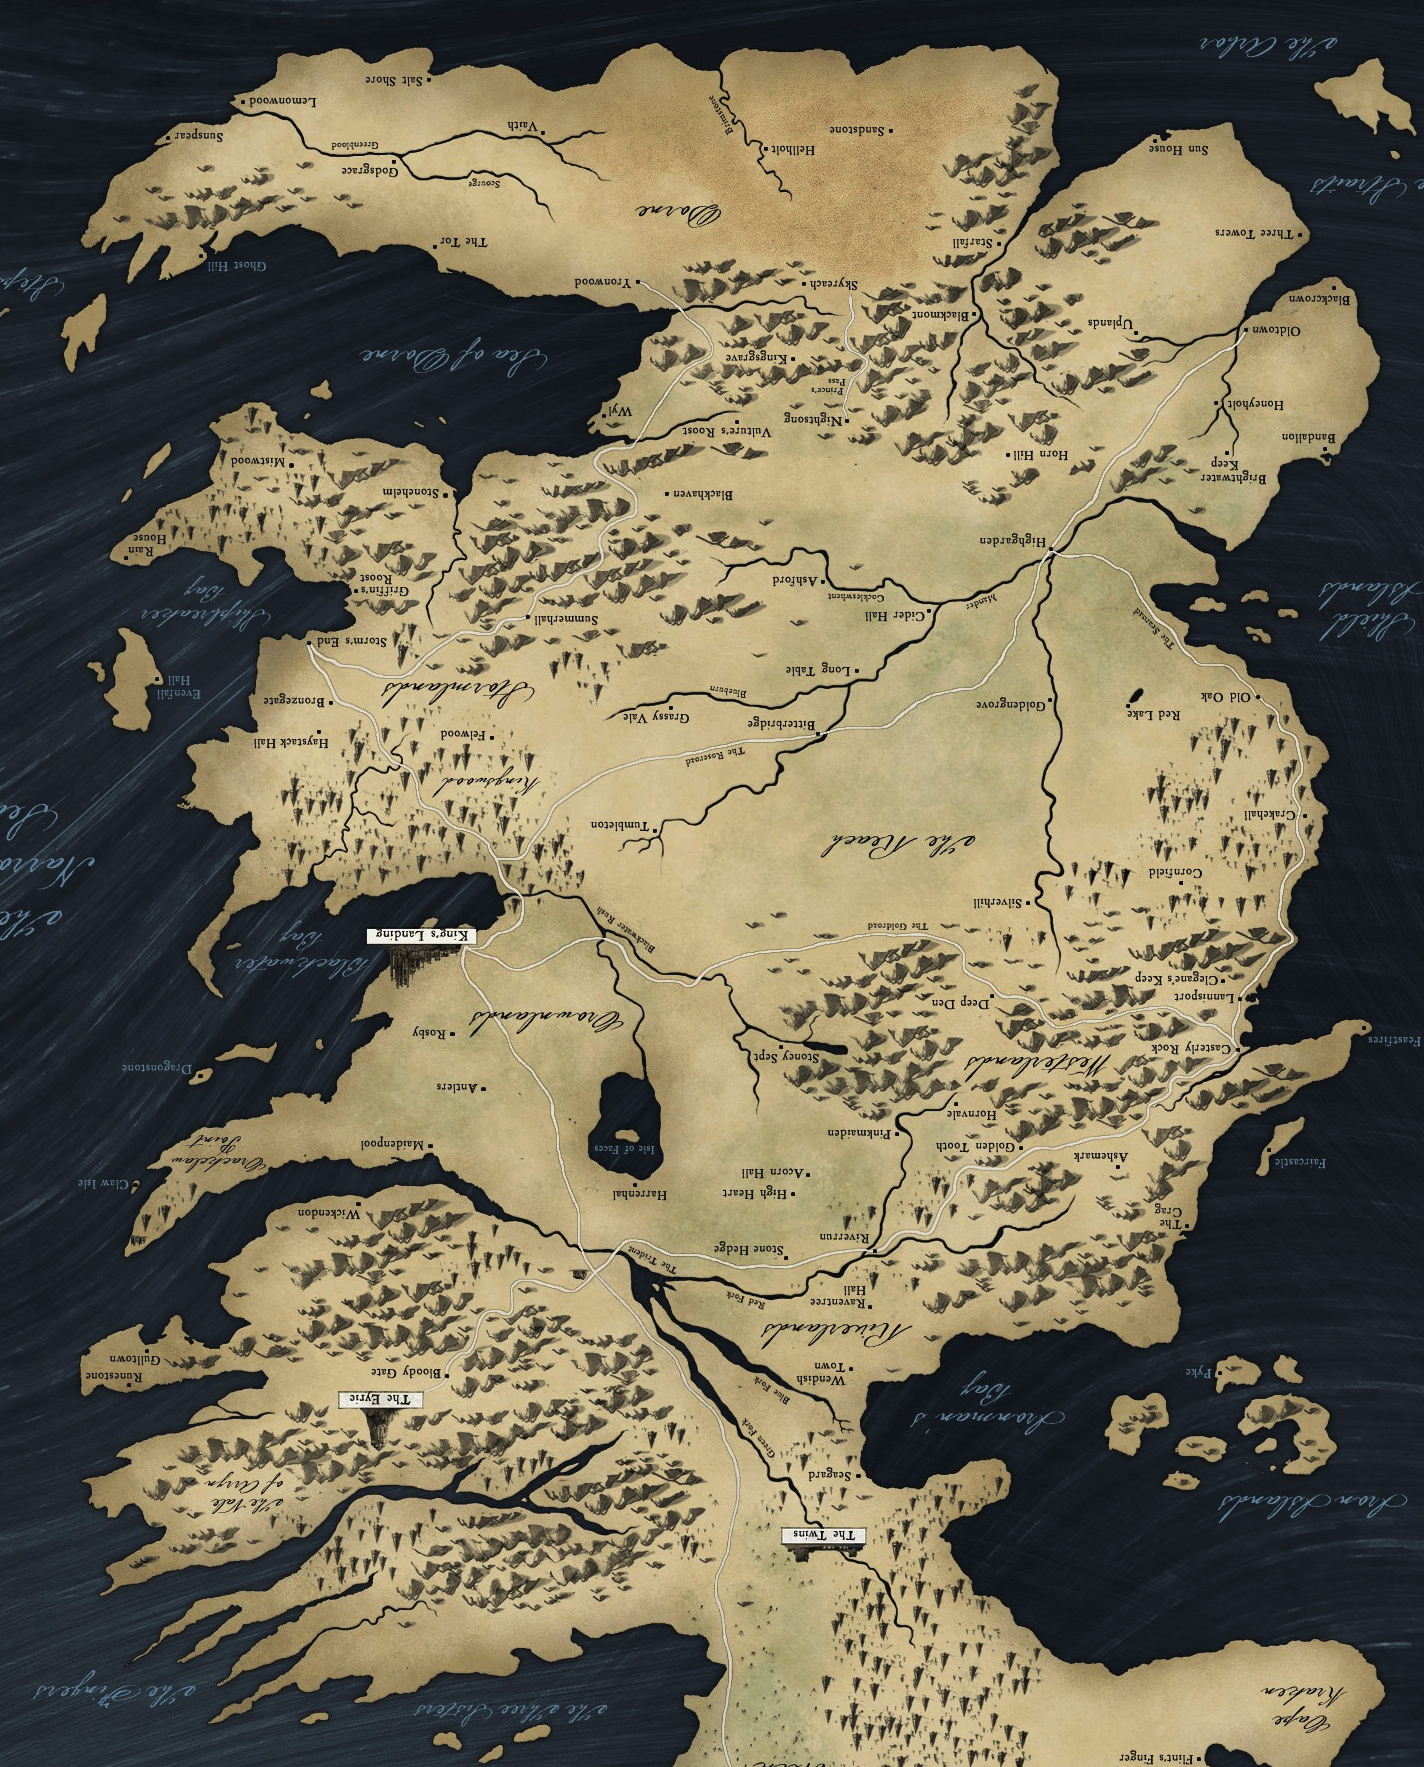 Game Of Thrones Map Of Westeros And Essos Wallpaper Download Best